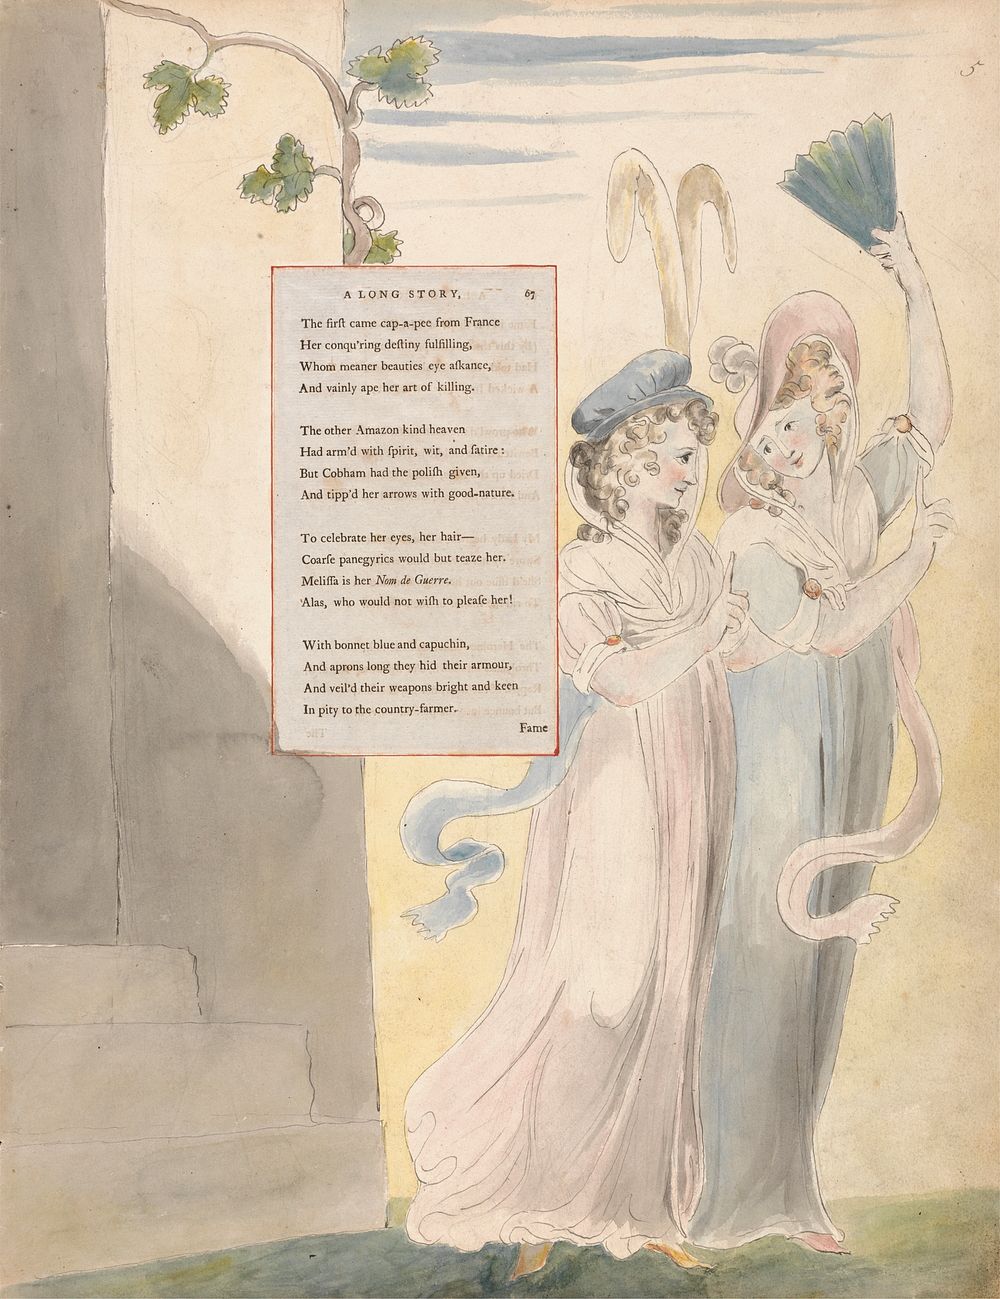 The Poems of Thomas Gray, Design 27, "A Long Story." by William Blake. Original public domain image from Yale Center for…